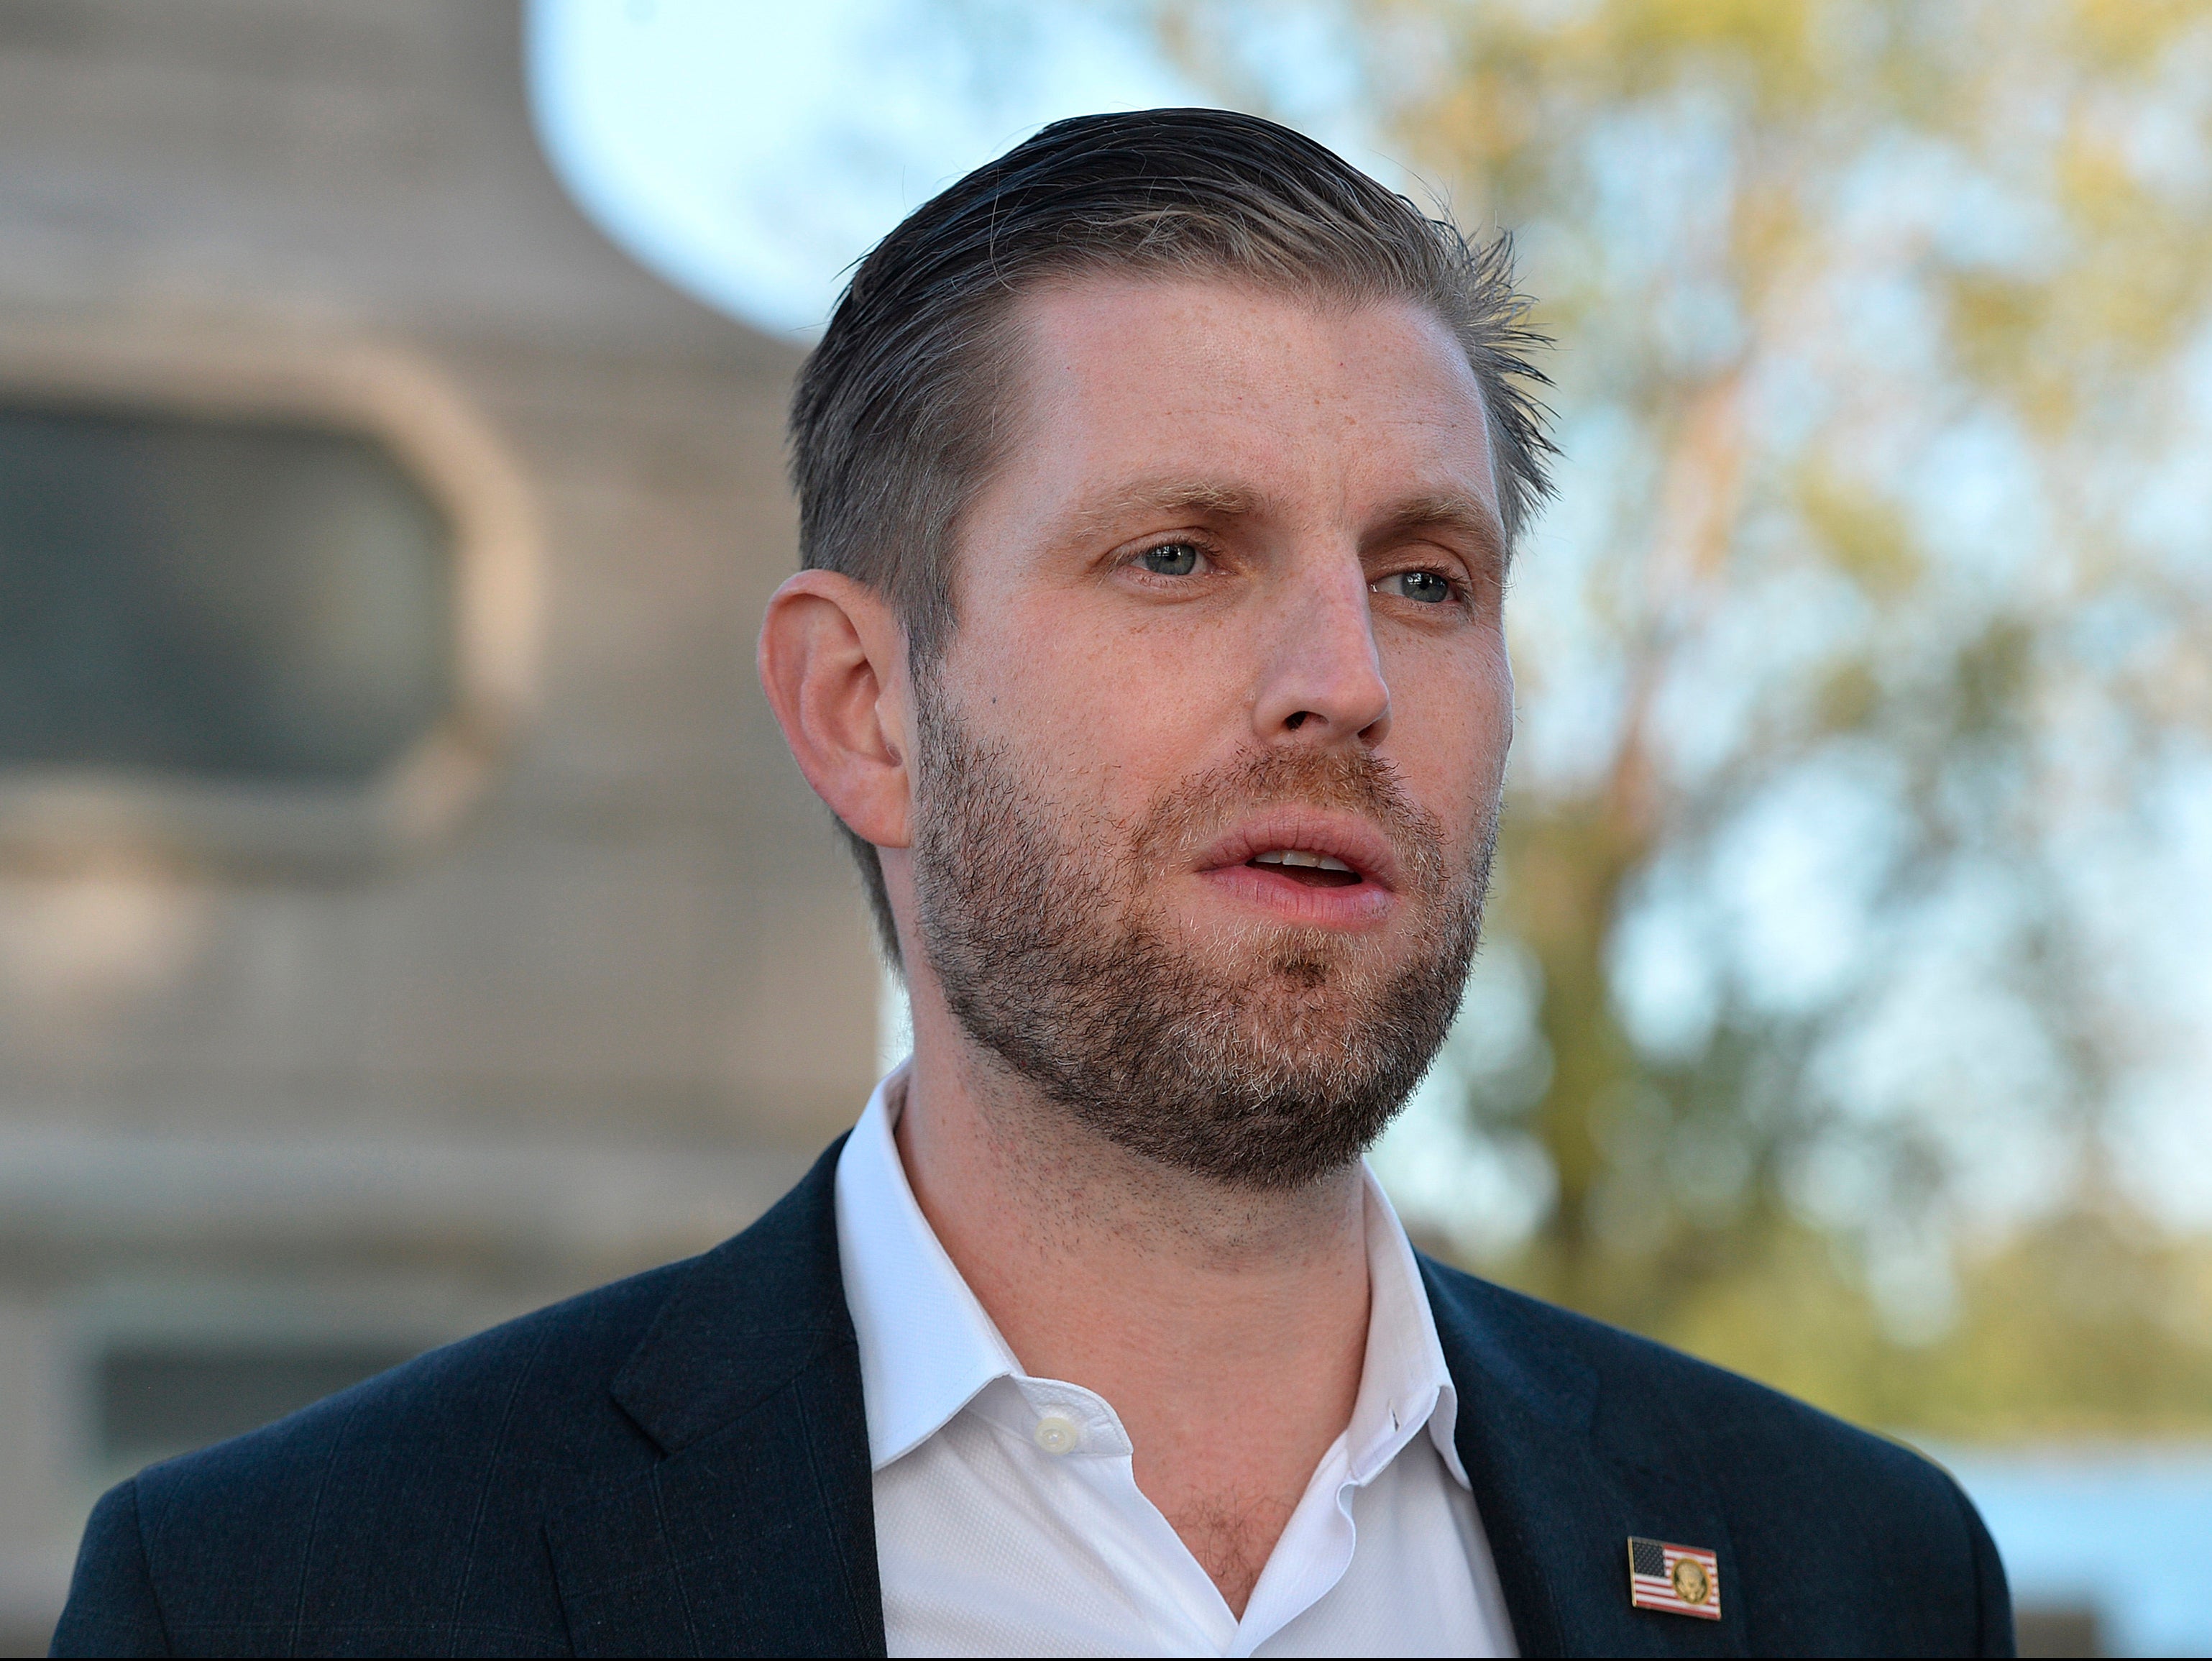 Eric Trump told a North Dakota radio station that his father “literally saved Christianity."